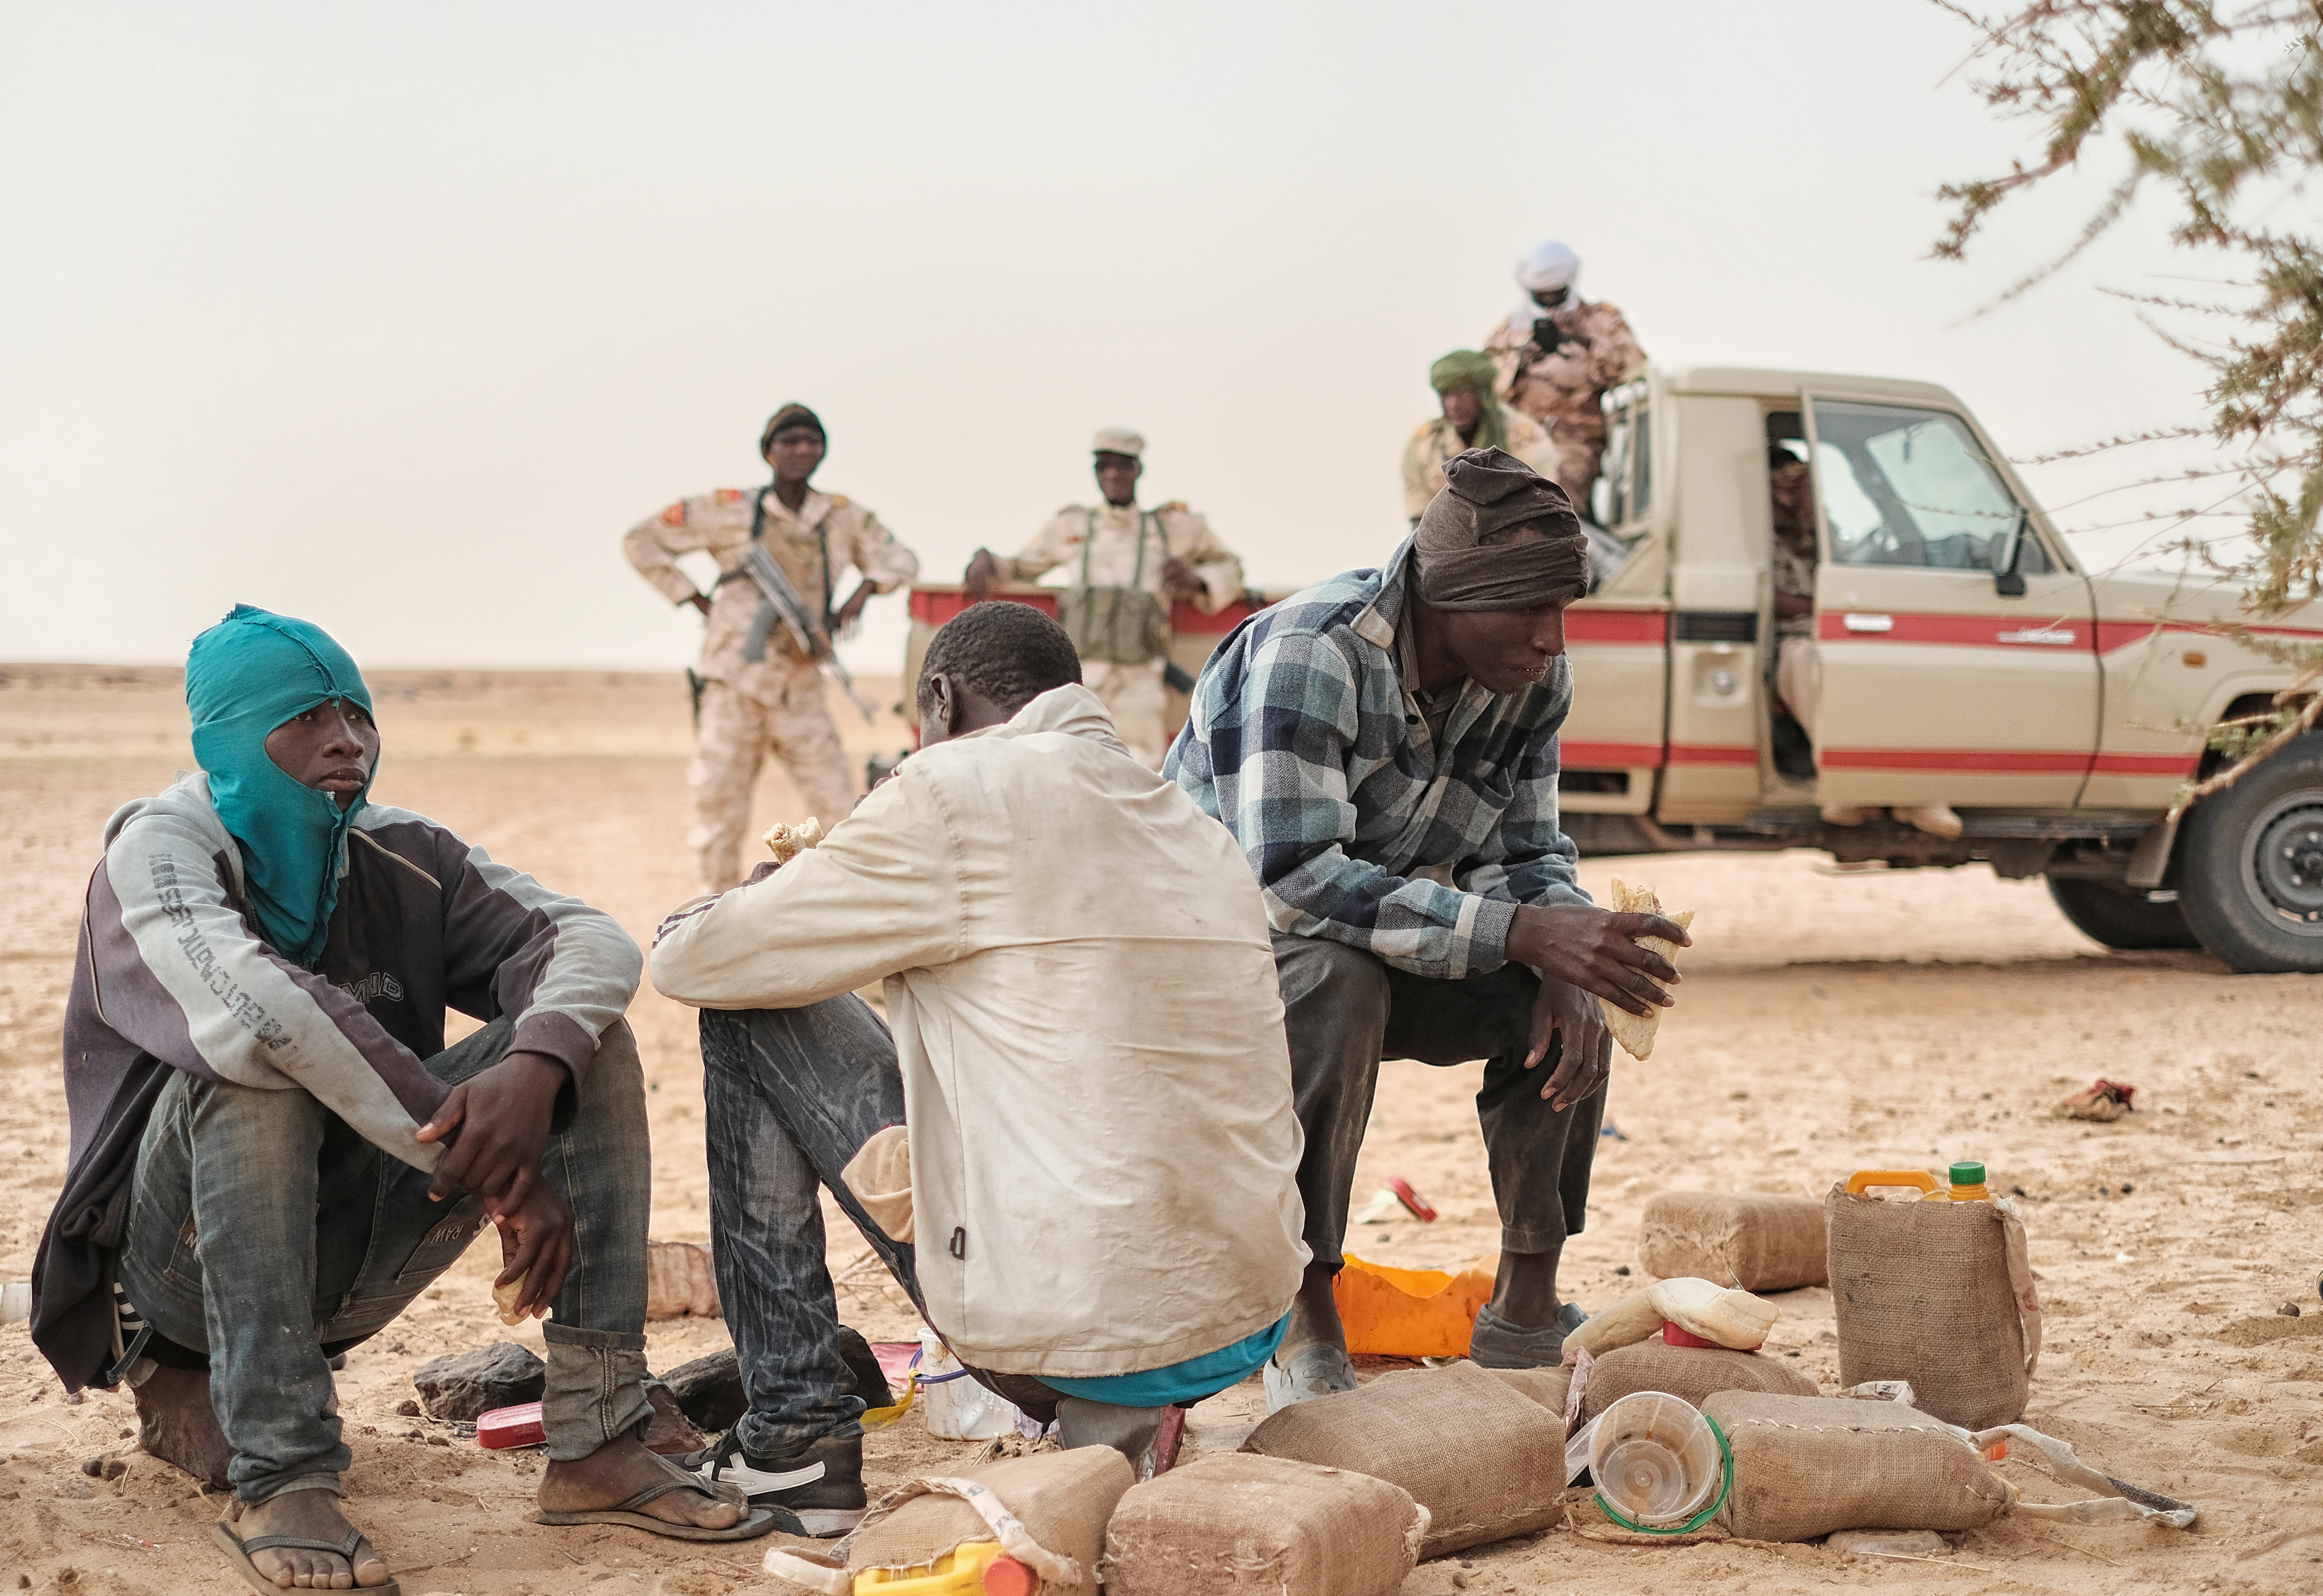 Migrants abandoned in the Sahara are found by a military patrol, on the route to Libya (from Giacomo Zandonini's reportage)